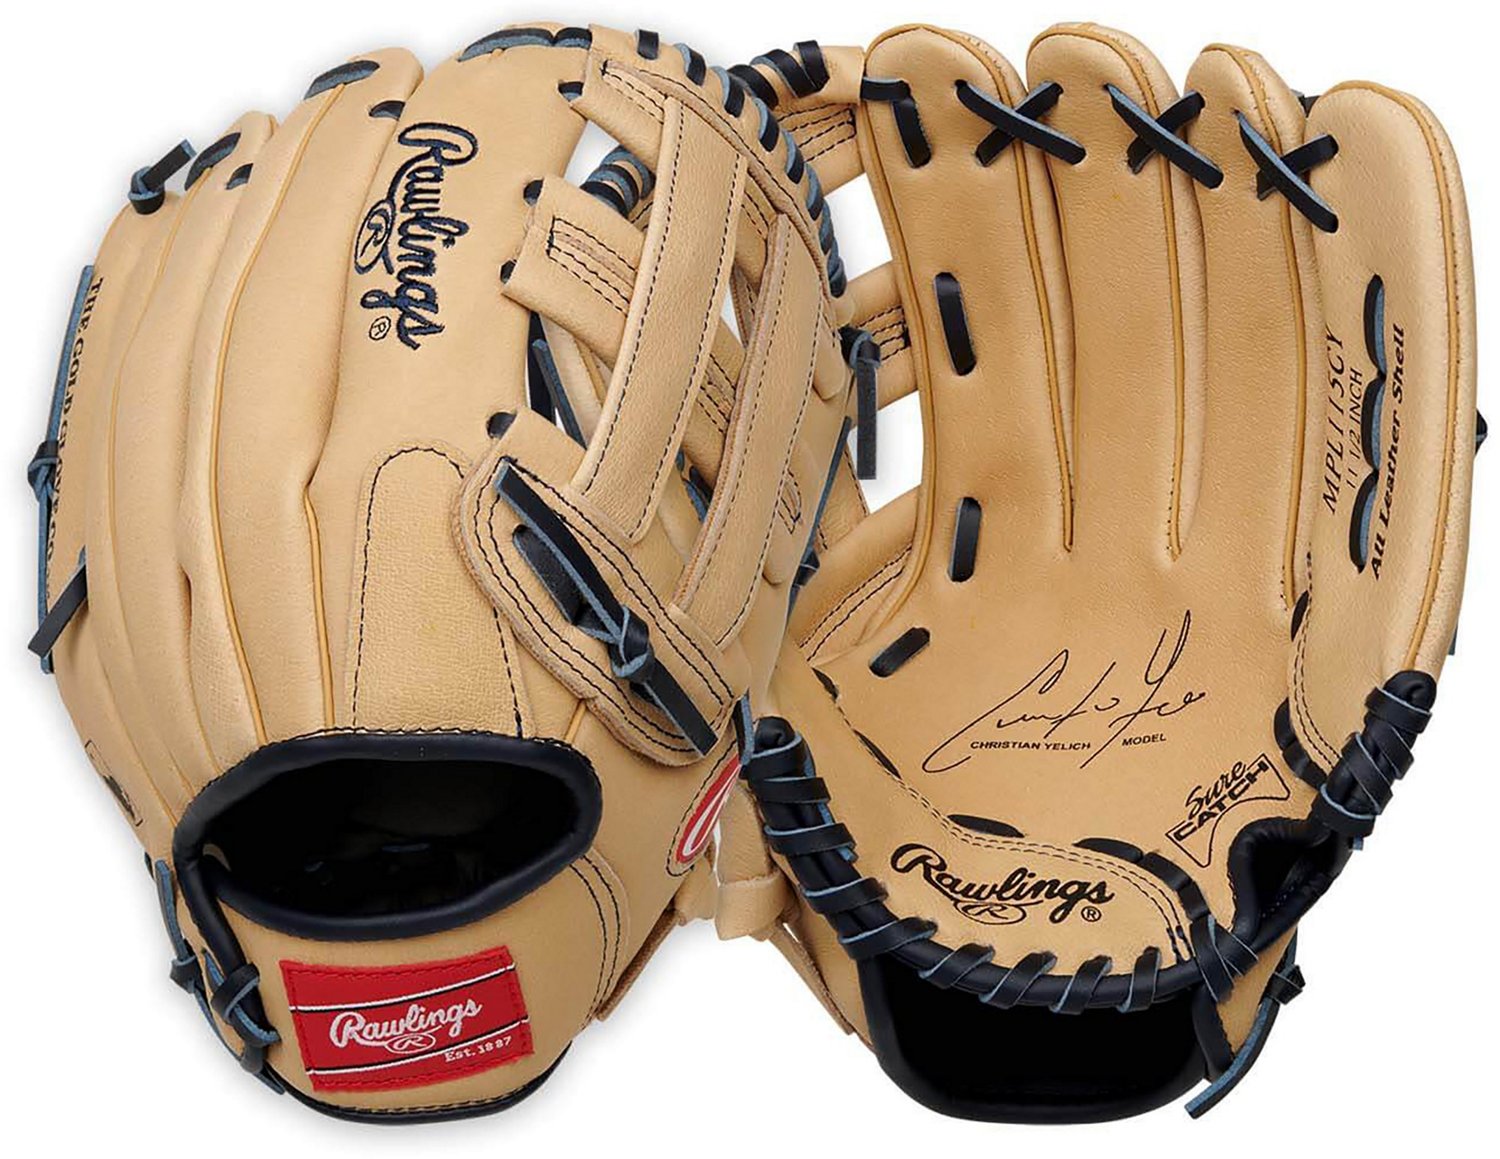  Christian Yelich Milwaukee Brewers Game-Used White and Navy  Under Armour Batting Gloves from the 2019 MLB Season - MLB Game Used Gloves  : פריטי אספנות ואמנות